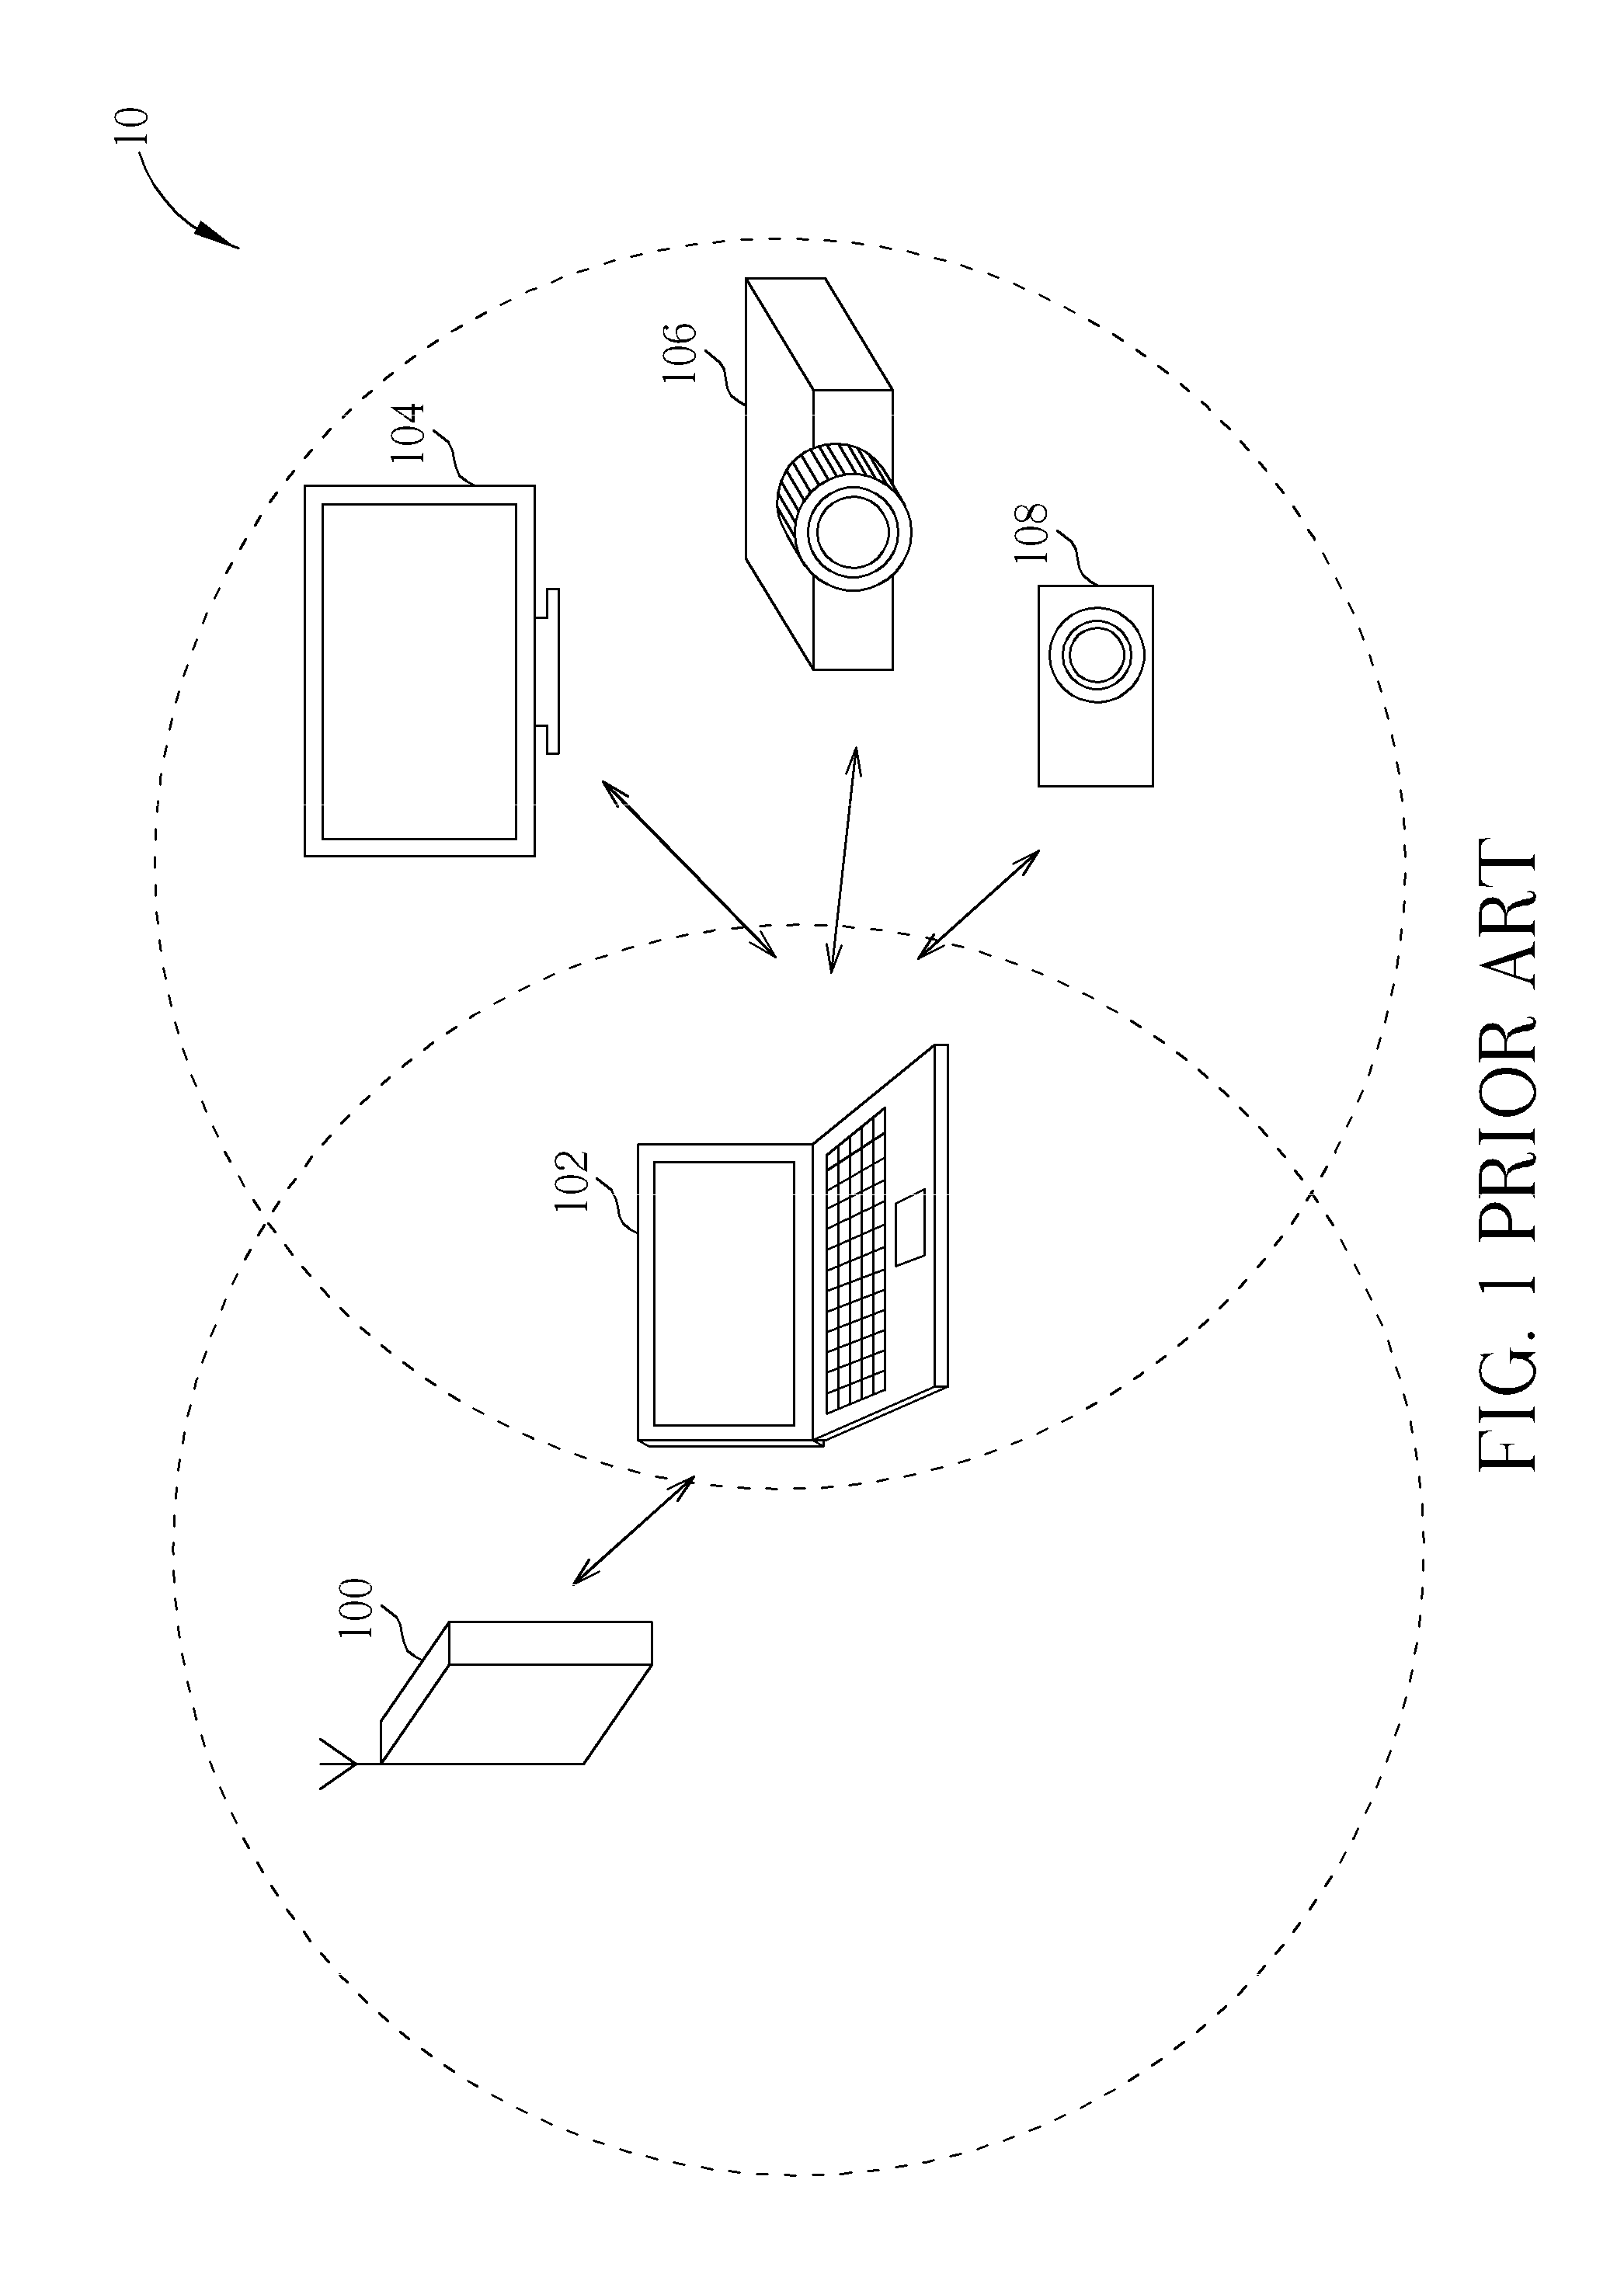 Concurrent control method for a communication device embedded with wi-fi direct